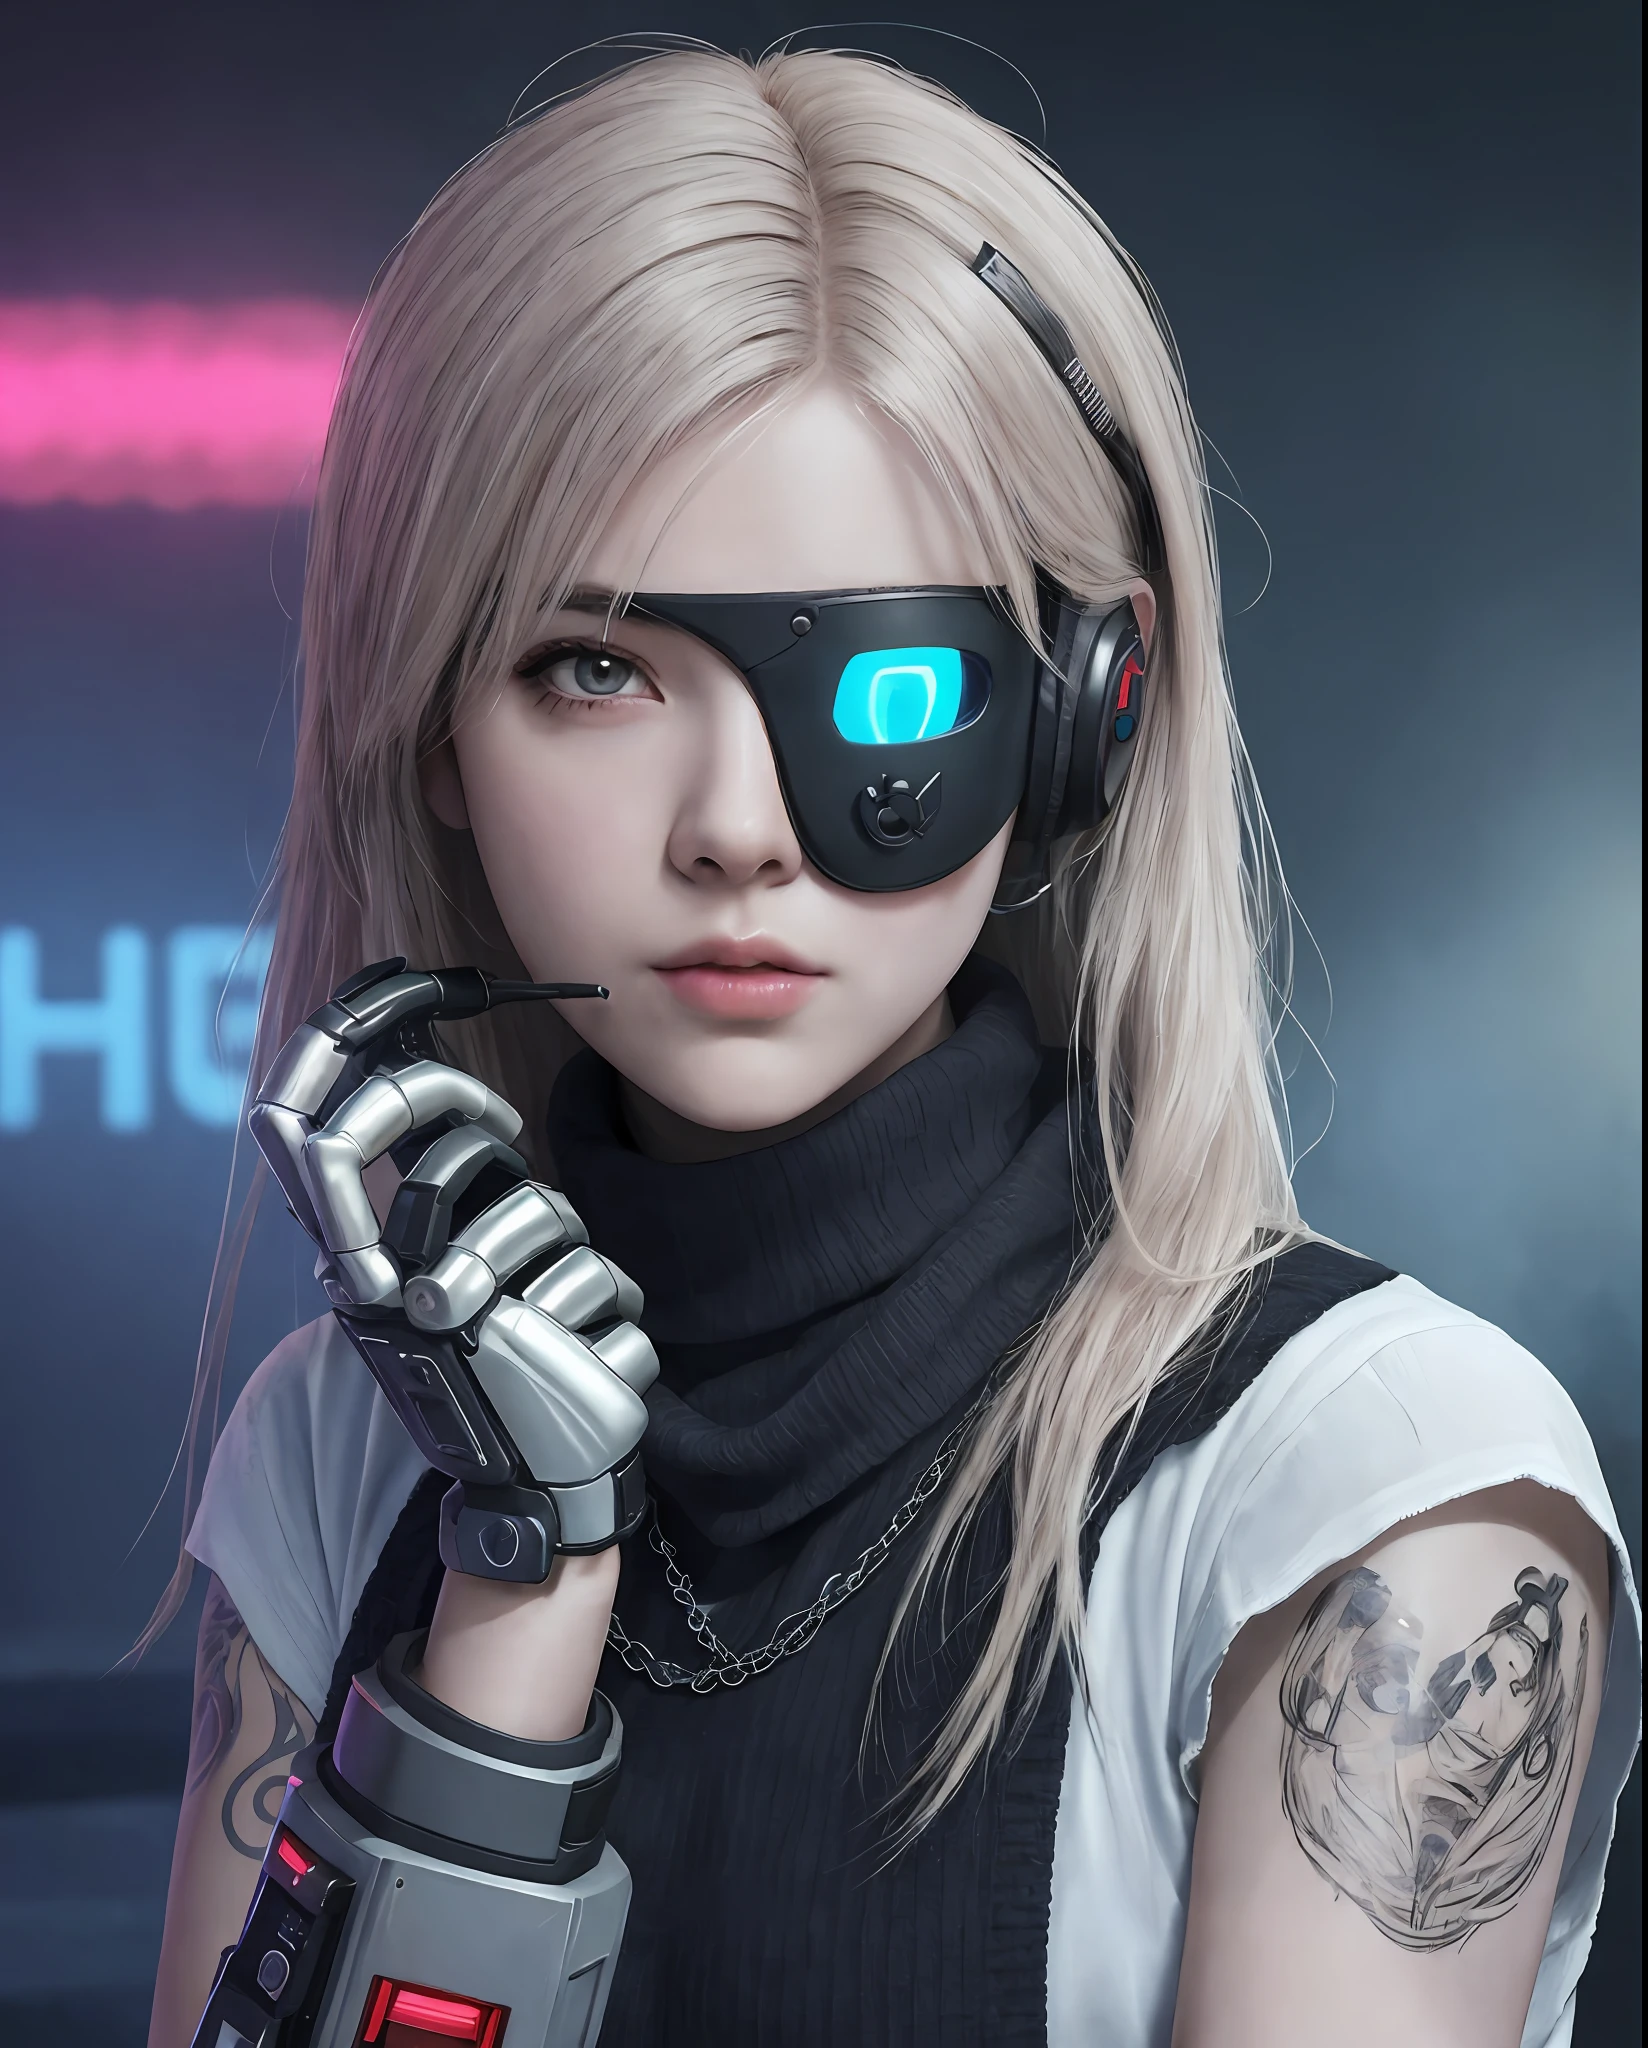 RAW, Masterpiece, Evil woman, undead, demi-human, Ultra Fine Photo, medium breast, Best Quality, Ultra High Resolution, Photorealistic, Sunlight, Portrait, Stunningly Beautiful, blindfolded, blindfold, half body, Delicate Face, Vibrant Eyes, RAW photo, 1girl, solo, 1girl, solo, half body, holding weapon, science fiction, assault rifle, straight-on, red scarf around the neck, solo, armor, ((see through cloths)), onisamurais girl futuristic, pussfer vest,cyberpunk, vr headset, mecha mask, demon, futuristic cyberpunk, tattoes, analog photo, 3d realistic, stuning potrait, (extremely detailed CG unity 8k wallpaper), of the most beautiful artwork in the world, professional photography, trending on ArtStation, trending on CGSociety, Intricate, High Detail, Sharp focus, dramatic, photorealistic, cyberpunk, futuristic, pale skin, slim body, (high detailed skin:1.2), 8k uhd, dslr, soft lighting, high quality, film grain, Fujifilm XT3, demonic feminim, glossy, pink white vibes, necklace, piercing, ear piercing, tattoes, HELMET, MACHINE, GUN, SCIENCE FICTION, ROBOT, MECHA, HUMANOID, emo_hairstyle